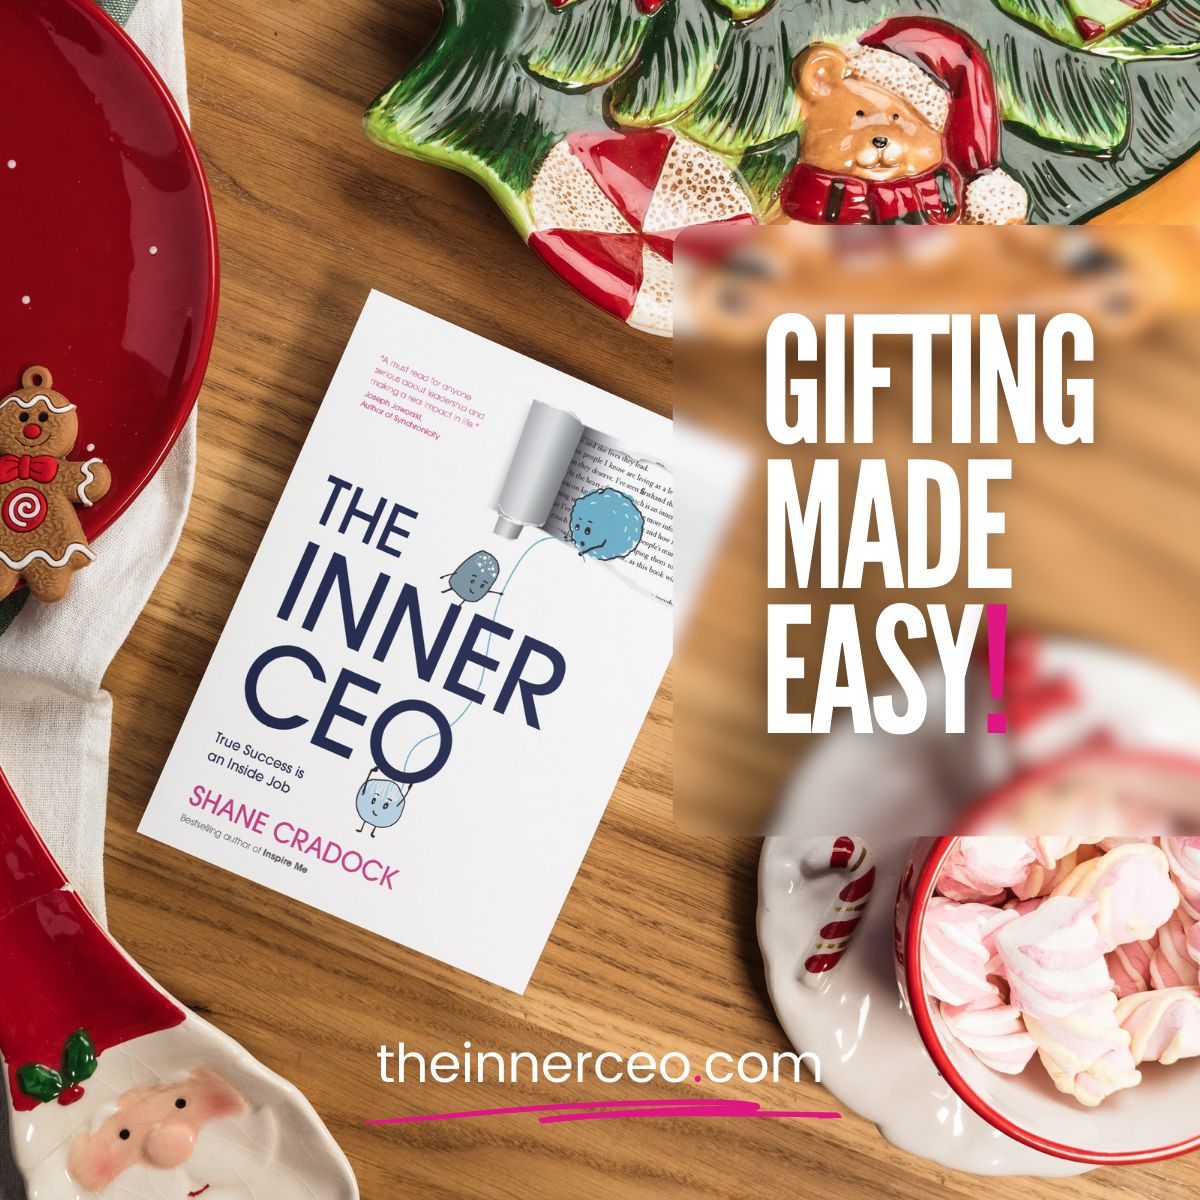 Gift inspiration with signed copies for orders of 5+ books. 📚 Personalise your presents for clients, family, or friends and we'll deliver globally. 🌍 Email shane@shanecradock.com to order! #TheInnerCEO #HolidayGifts #BookLovers 🎄✨